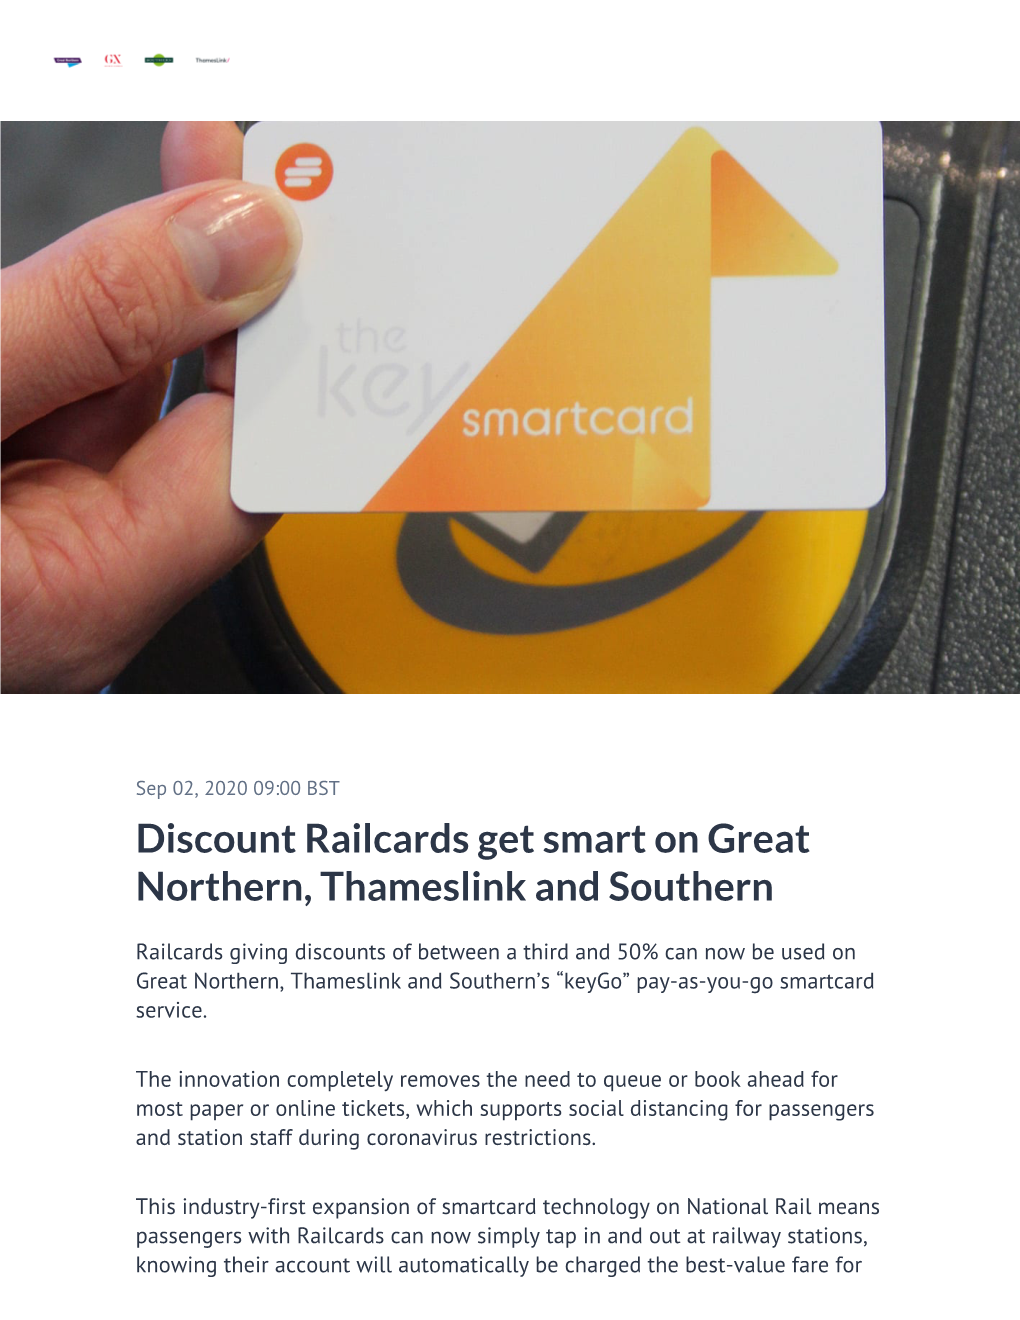 ​Discount Railcards Get Smart on Great Northern, Thameslink and Southern